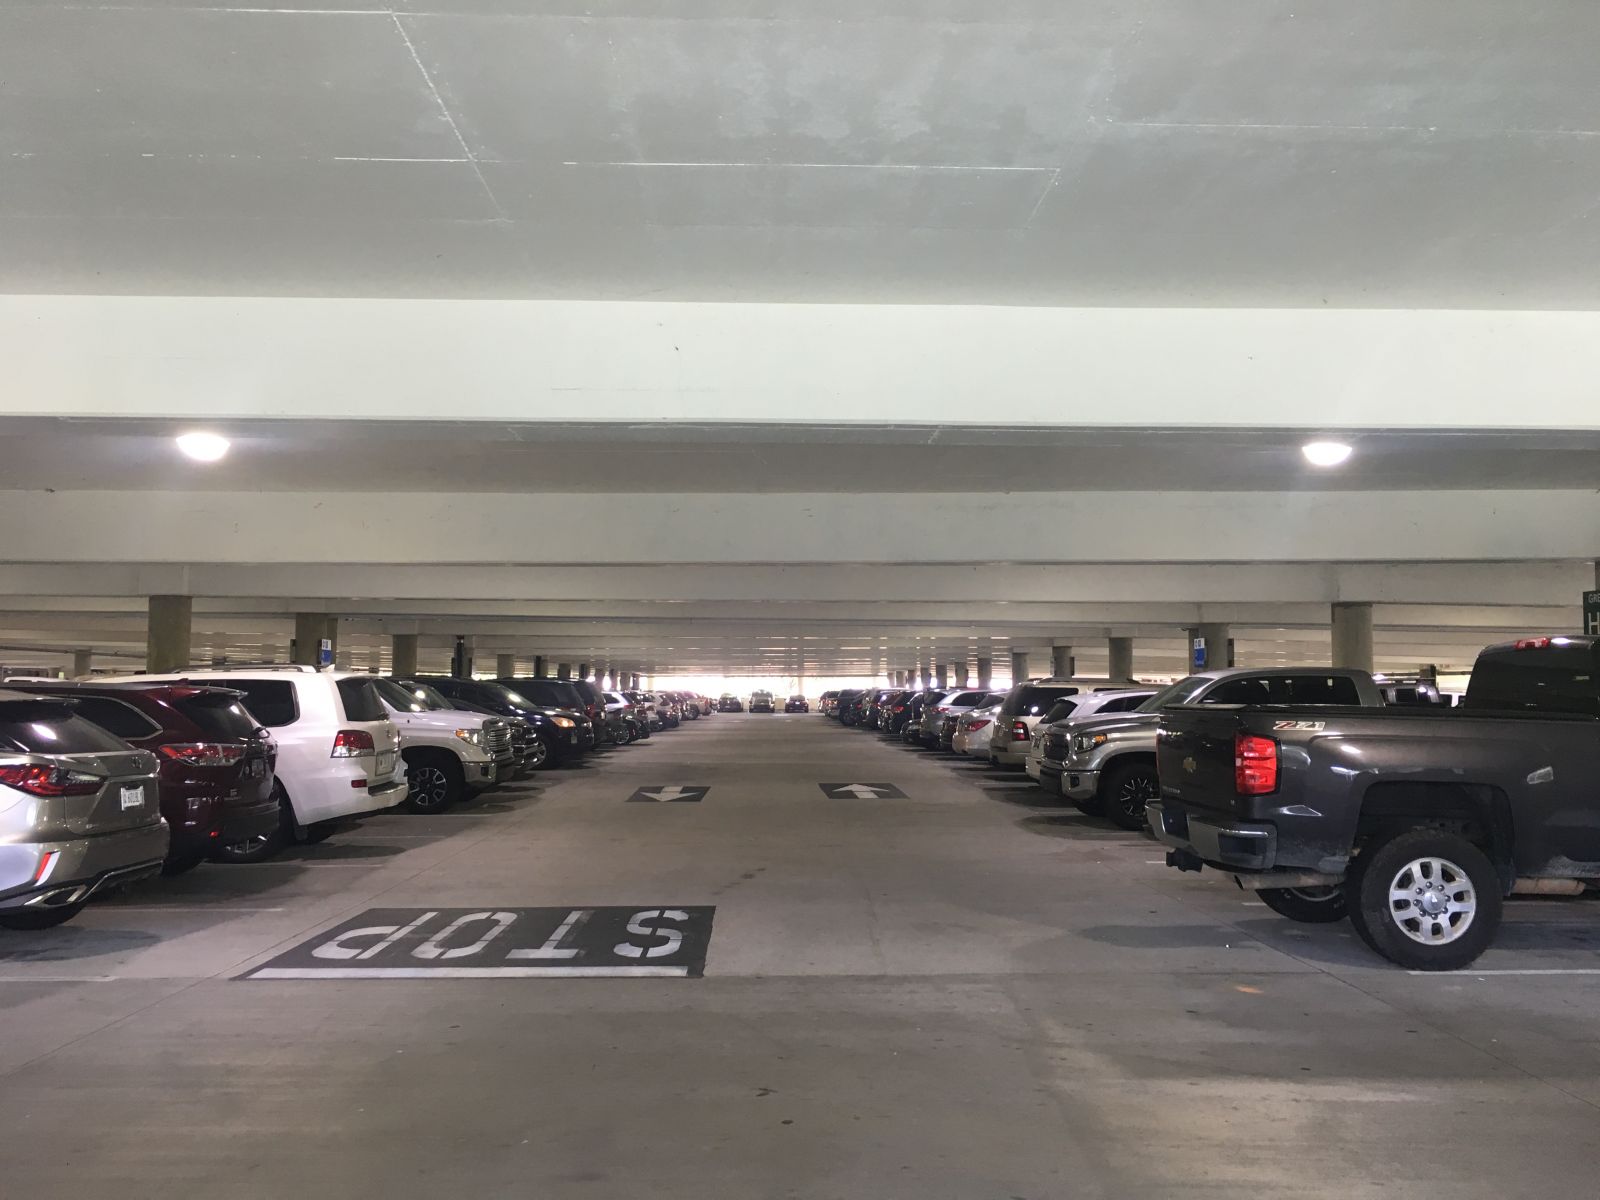 A new LED lighting system planned for the Columbia Metropolitan Airport will quickly allow travelers to spot open spaces on the second level of the airport garage. (Photo/Renee Sexton)